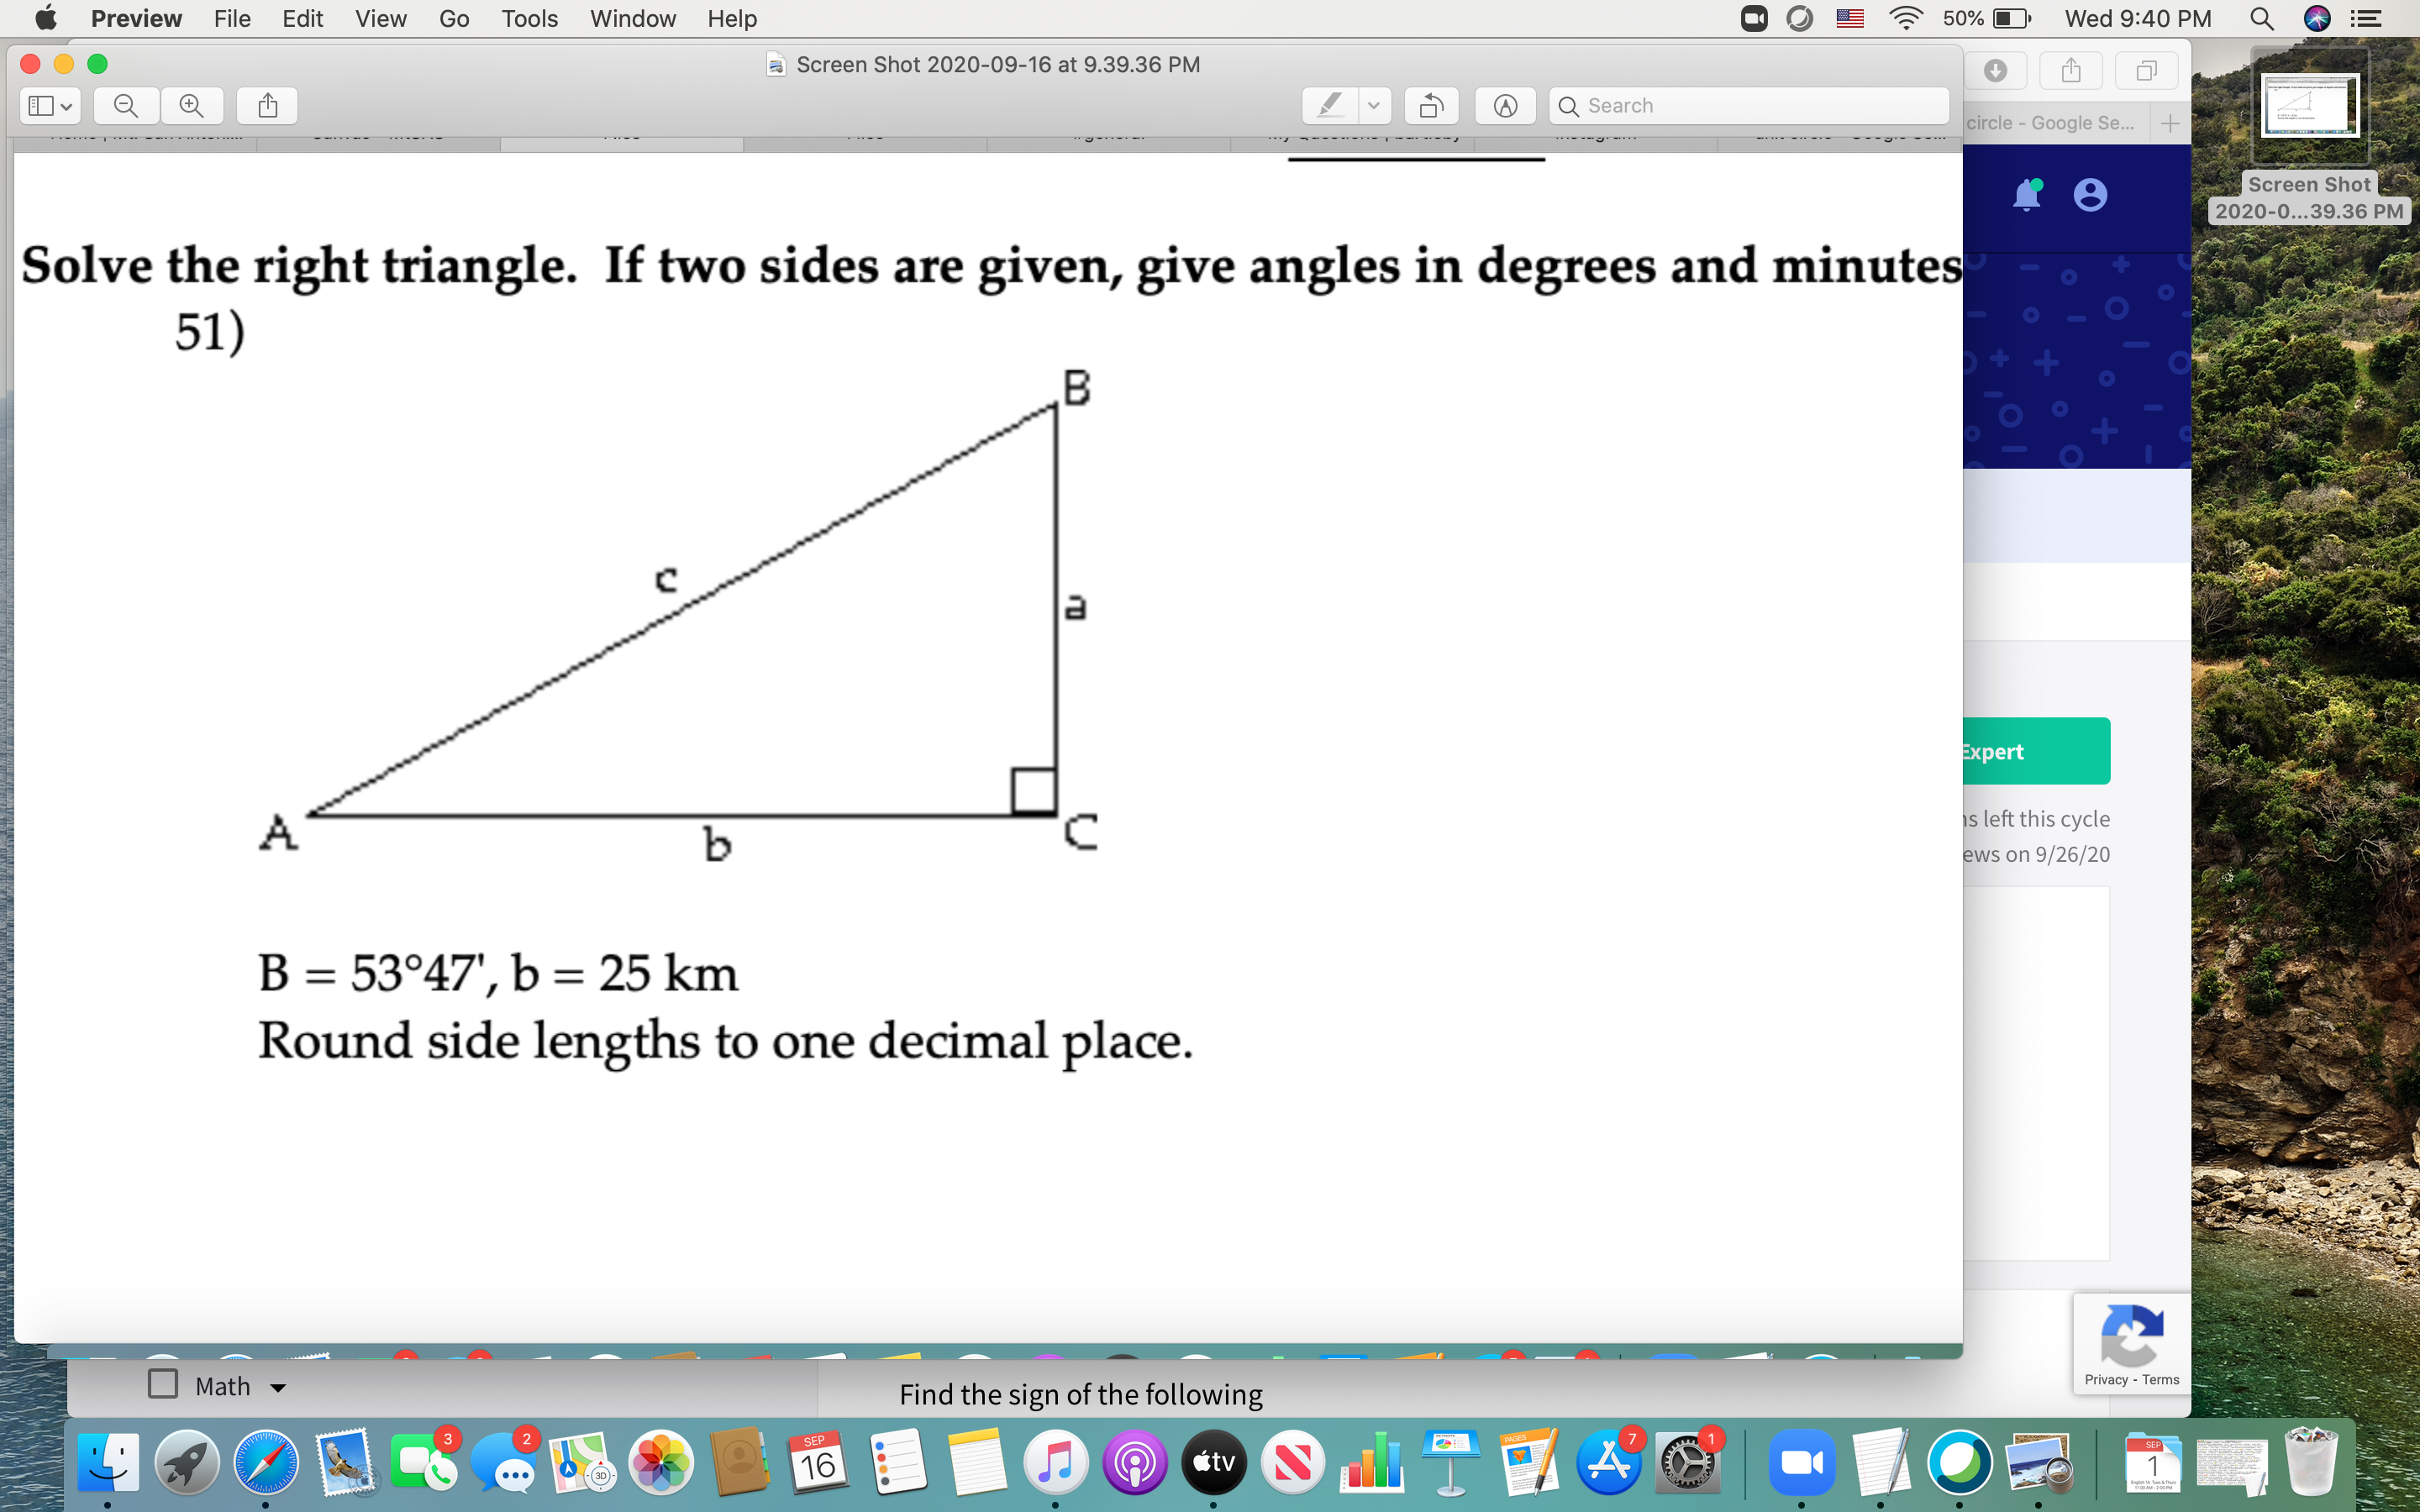 Solve the right triangle. If two sides are given, give angles in degrees and minutes
51)
B
b
B = 53°47', b = 25 km
Round side lengths to one decimal place.
